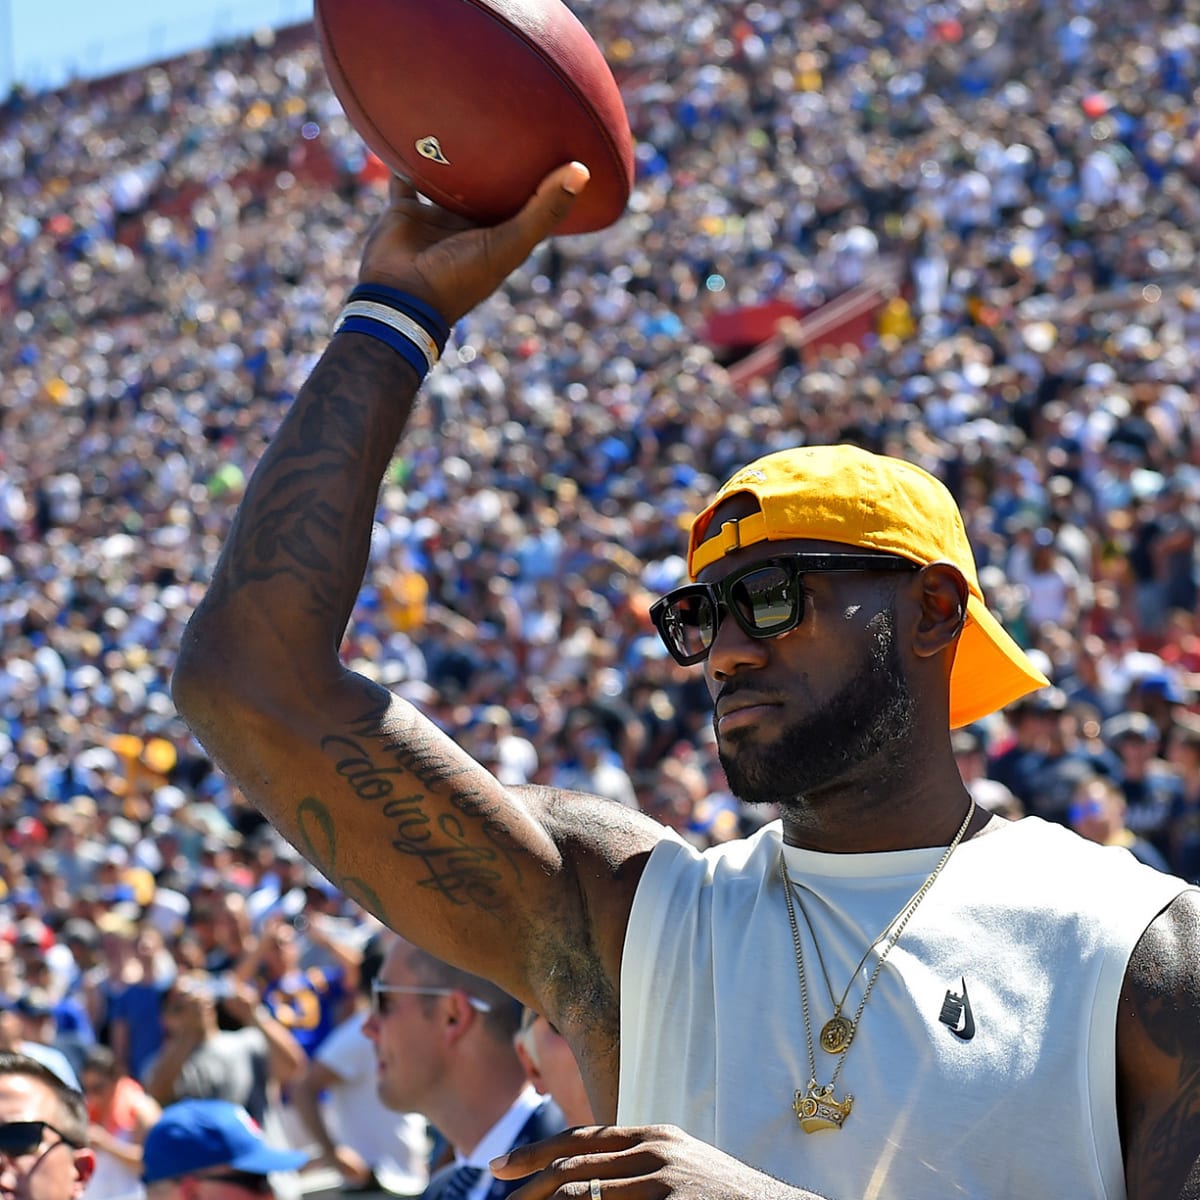 LeBron James trained to be a football player during 2011 lockout